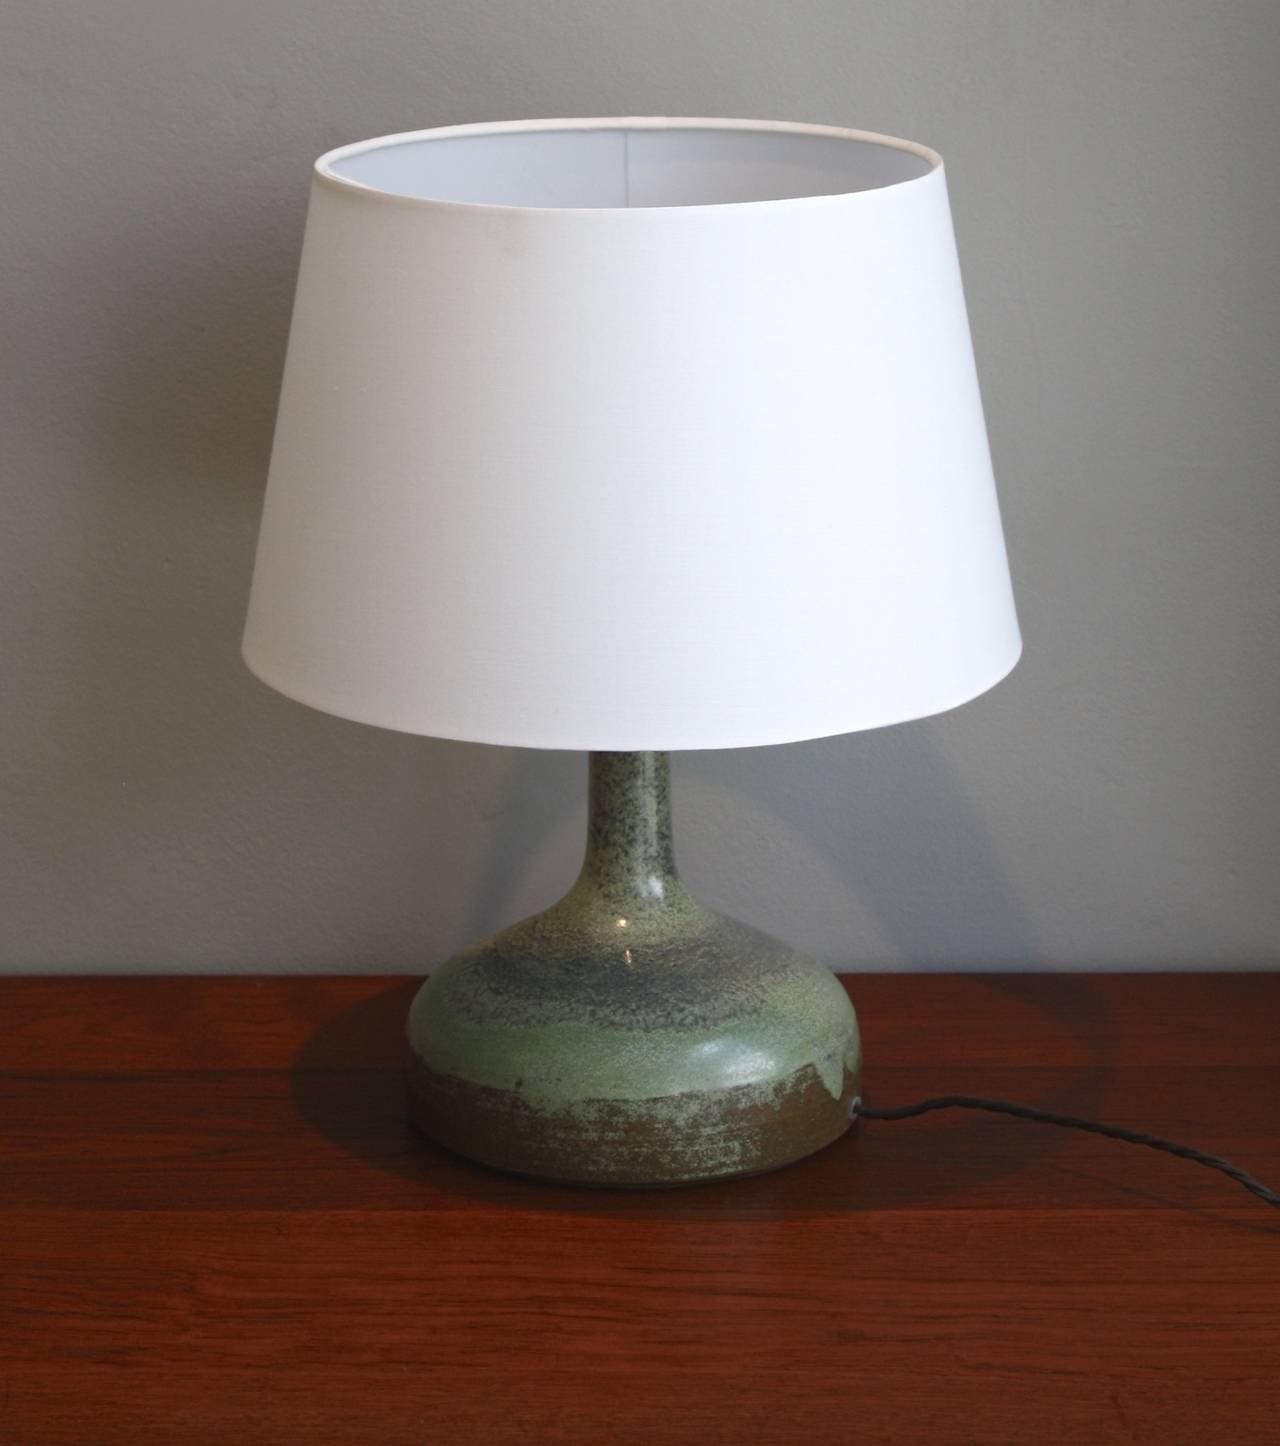 Fantastic rarely seen green Kähler table lamp base in perfect condition.